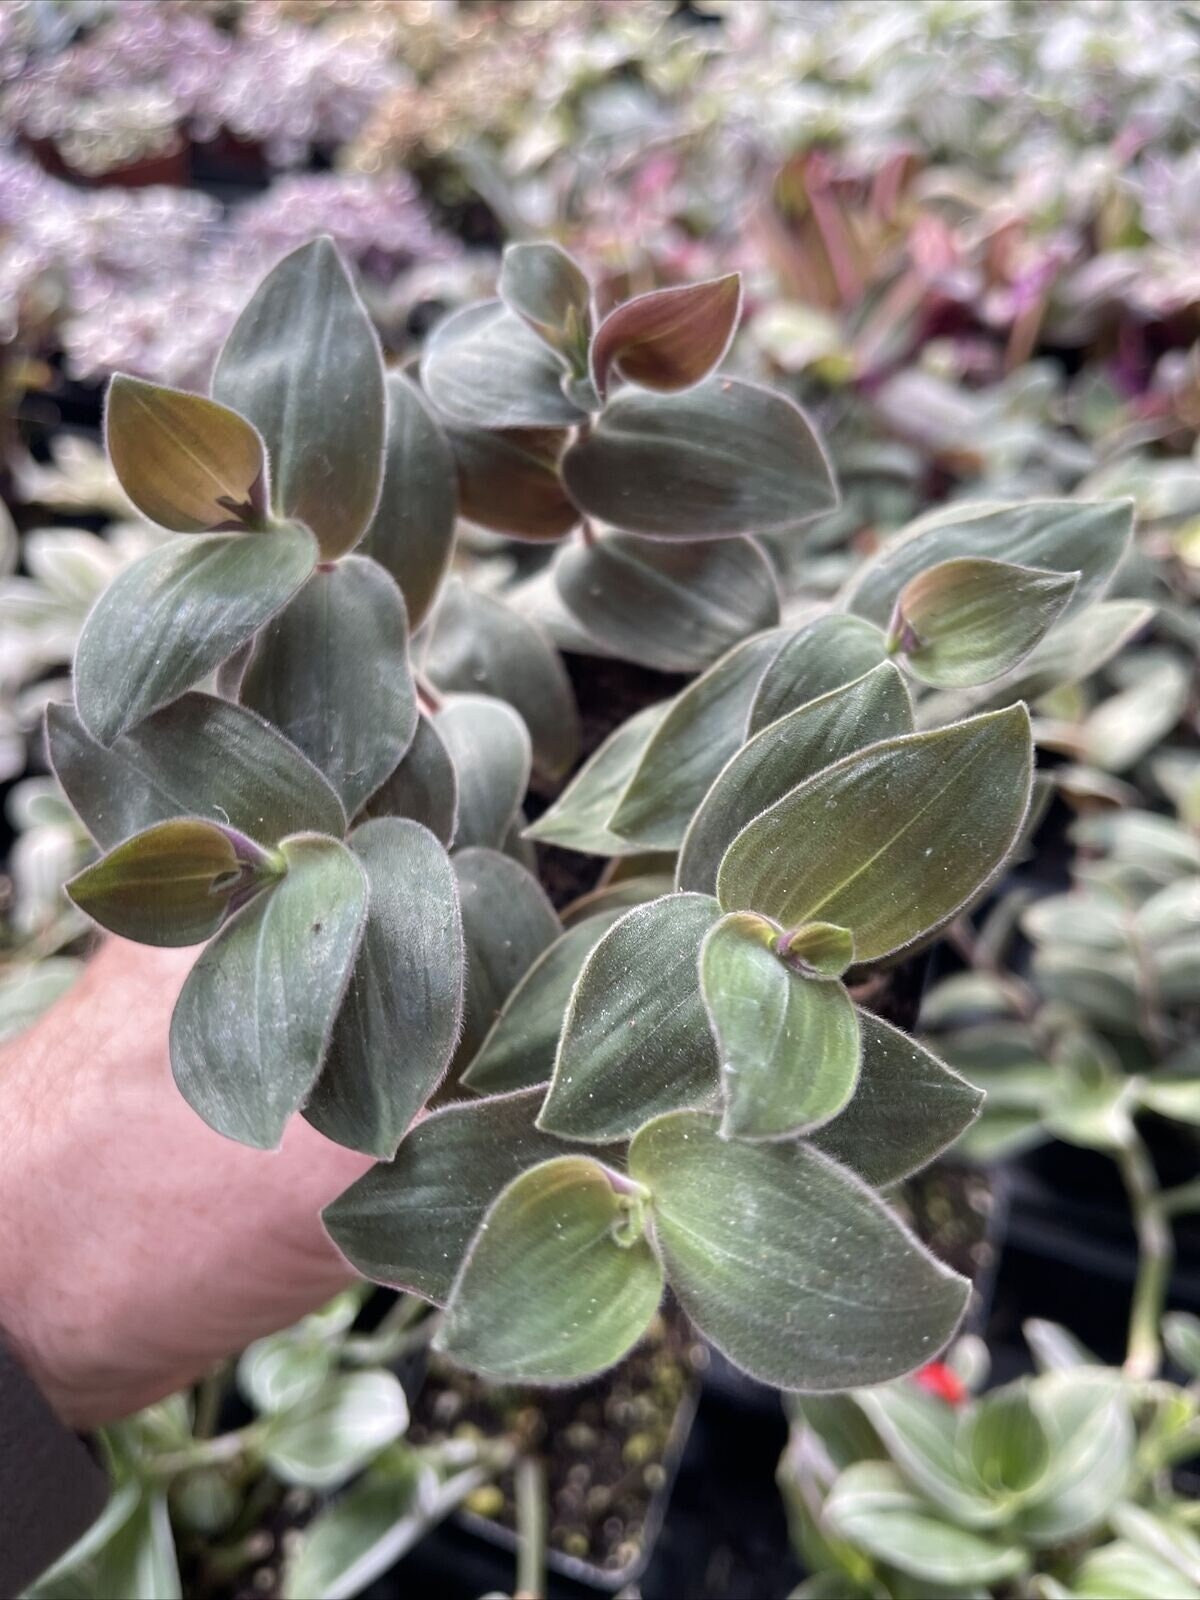 Tradescantia chrysophylla! “BABY BUNNY BELLIES” - 3 Large cuttings